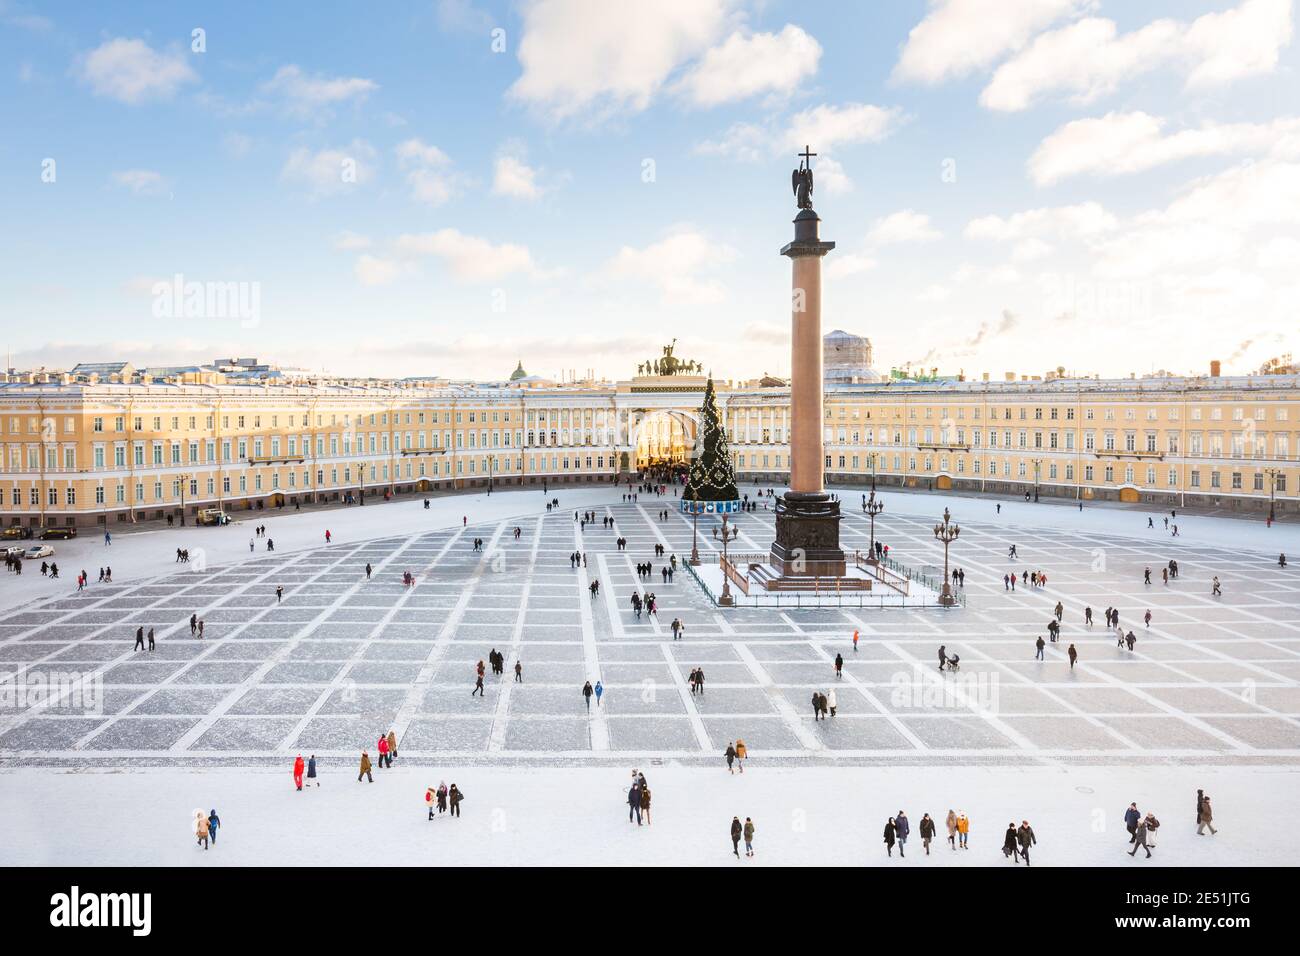 Wide angle view from above of Palace Square in a sunny winter day Stock Photo